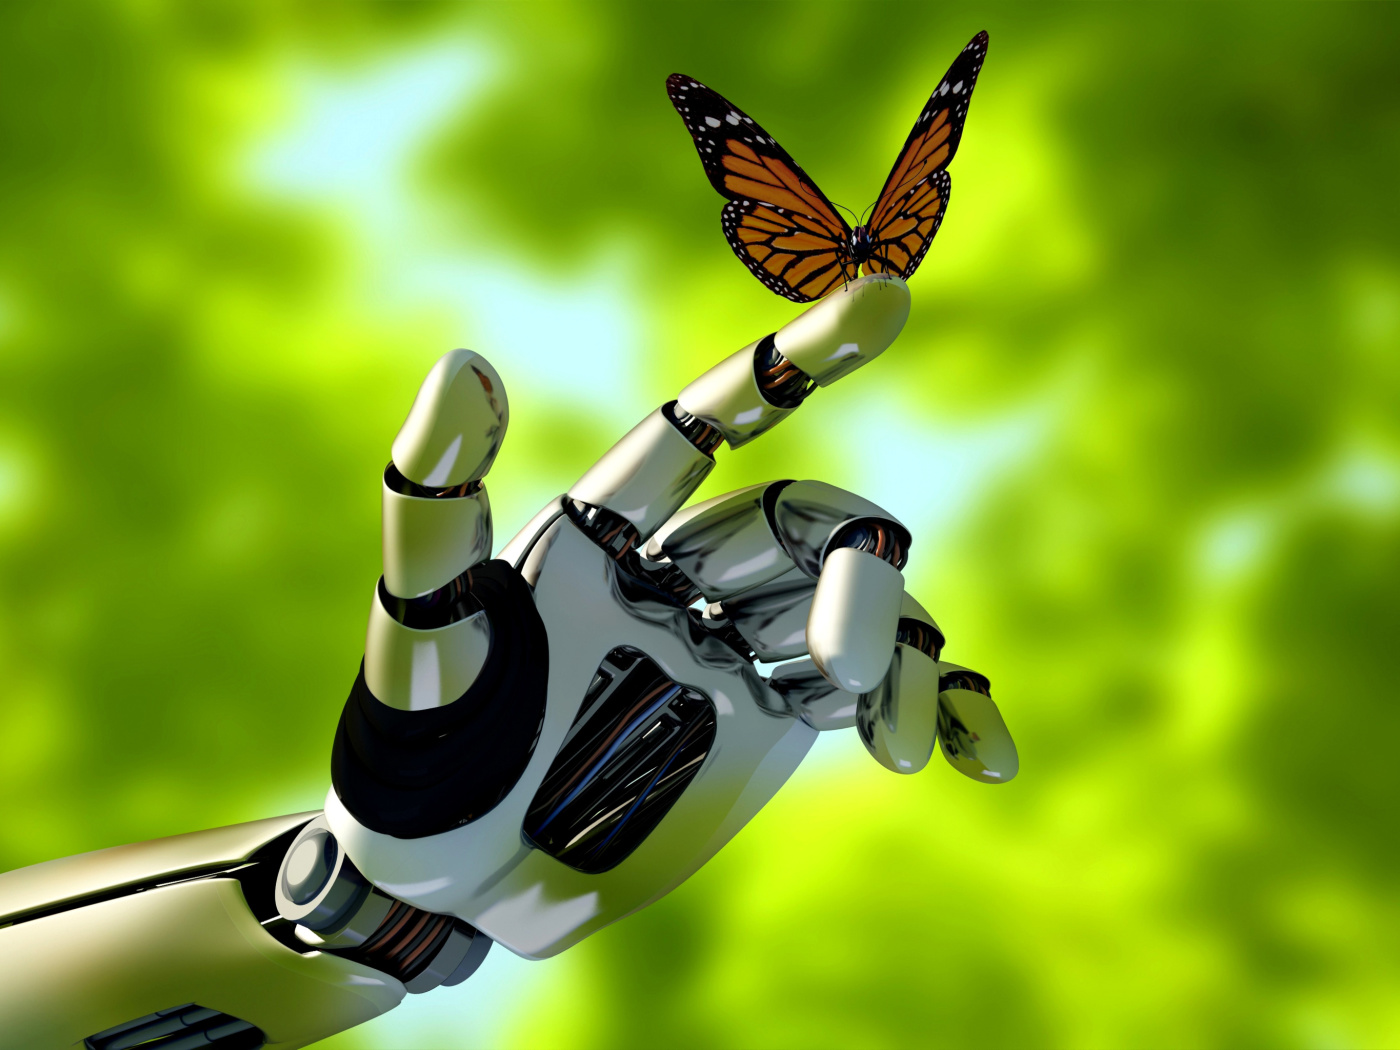 Robot hand and butterfly wallpaper 1400x1050